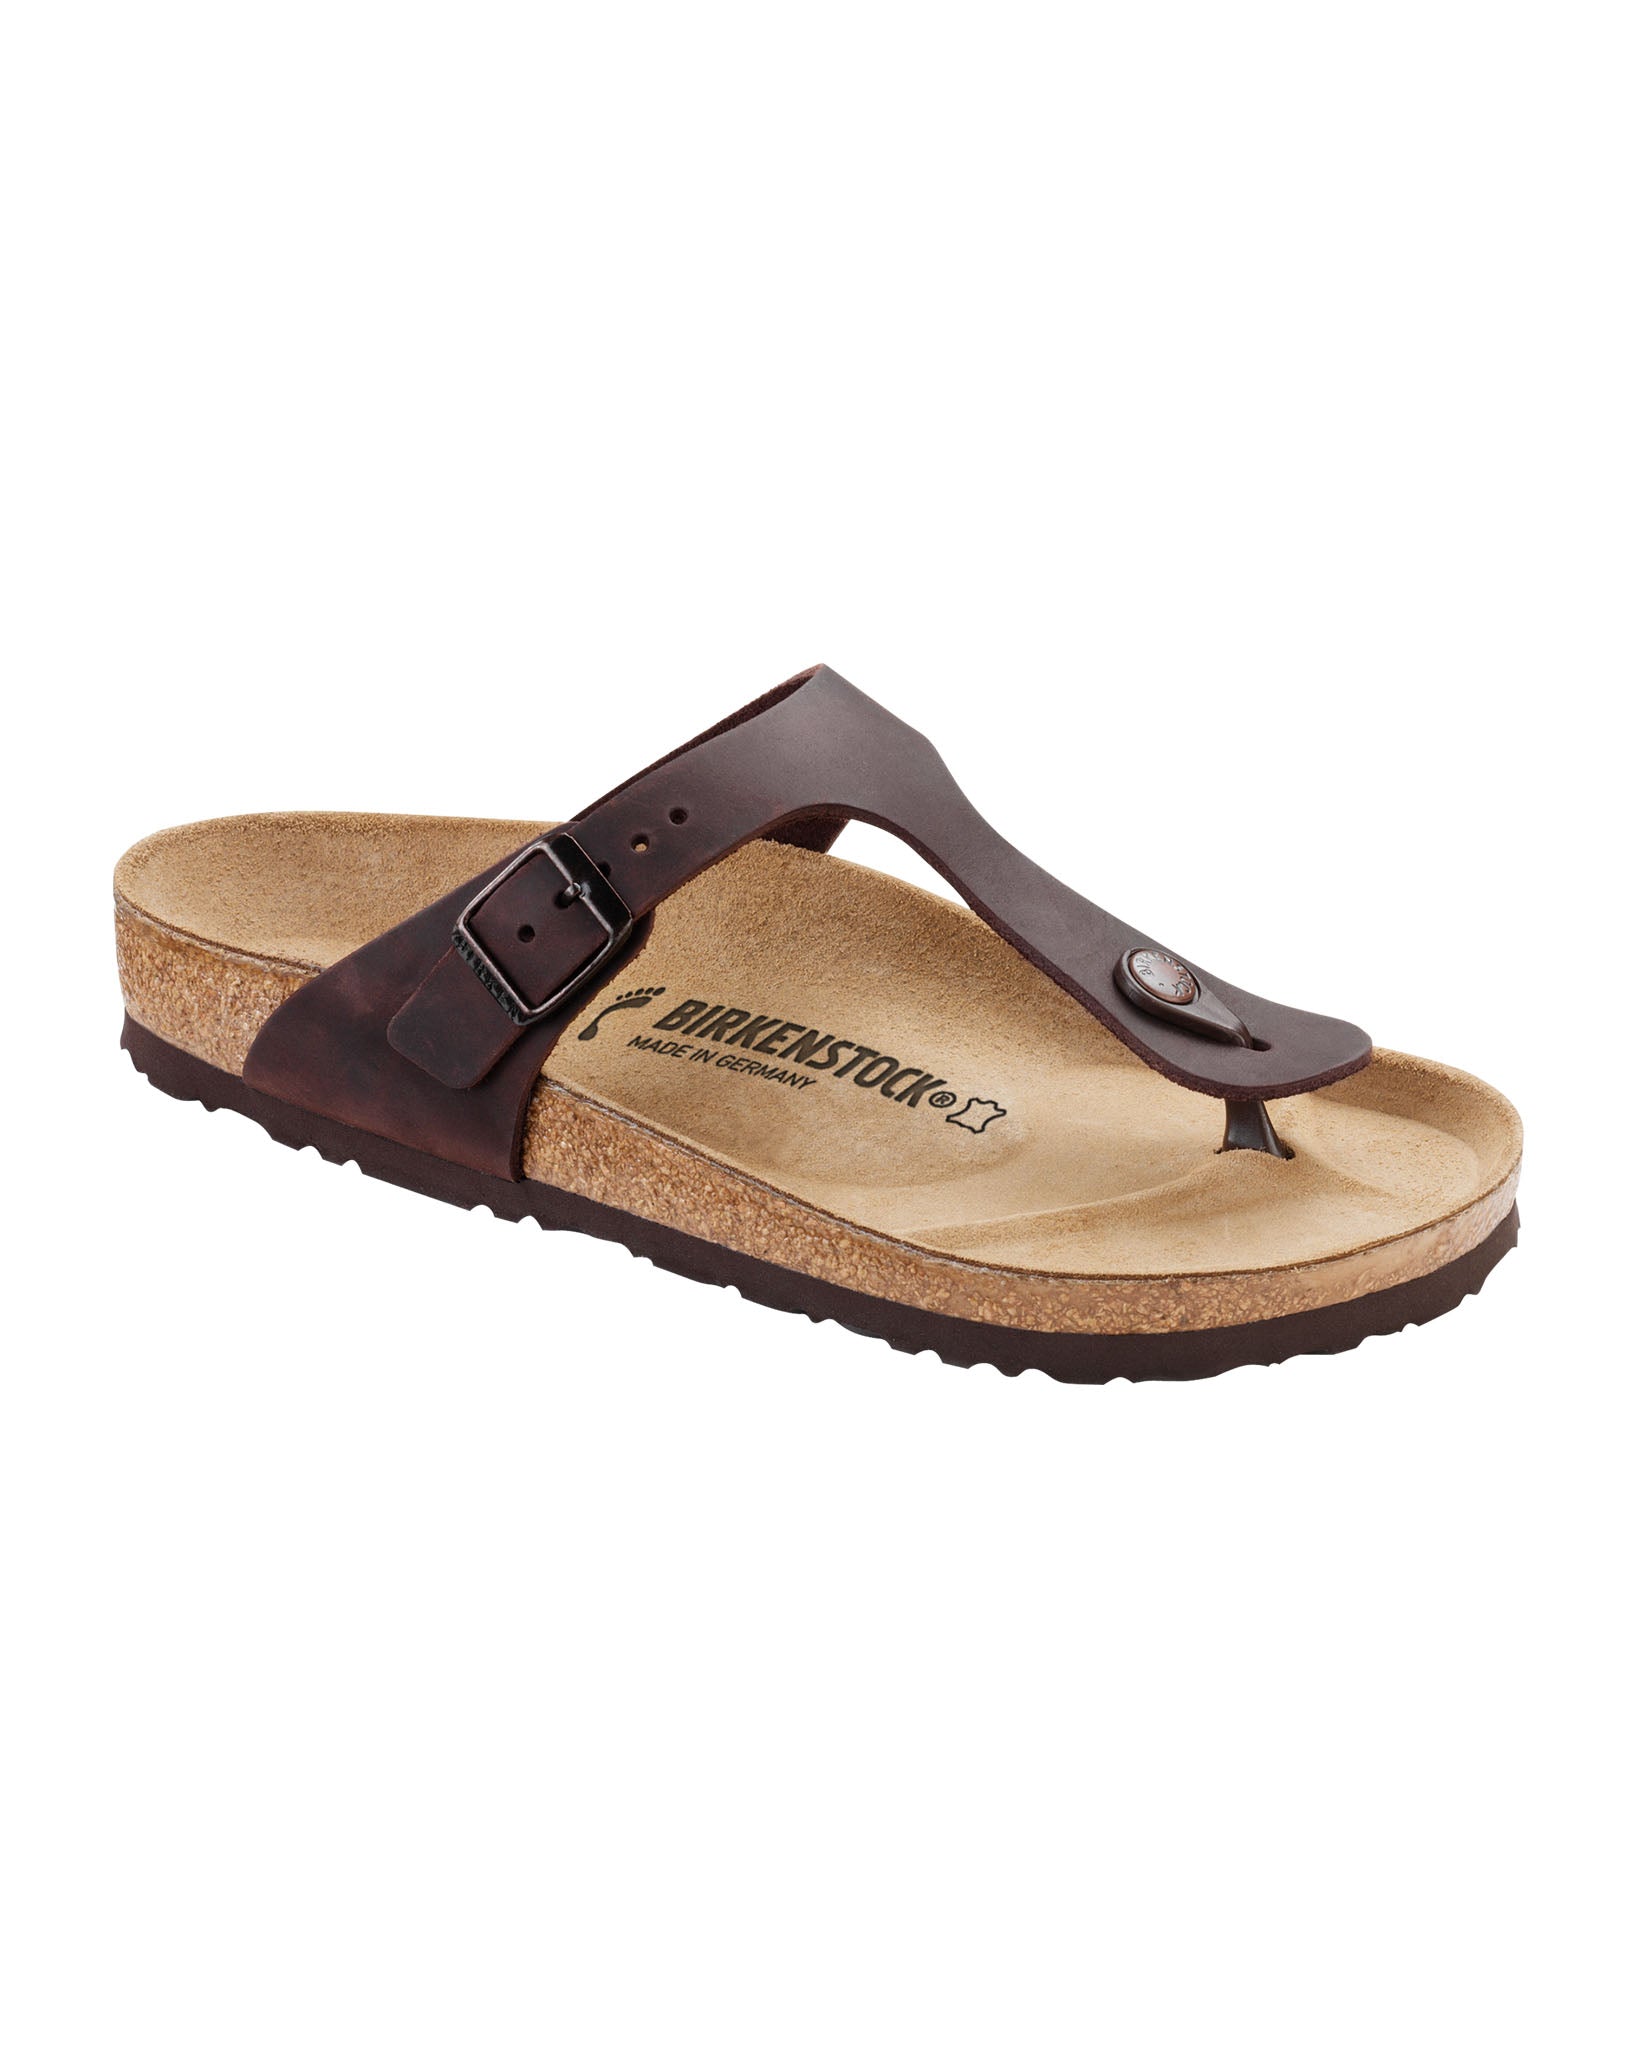 Gizeh Habana Oiled Leather Sandals